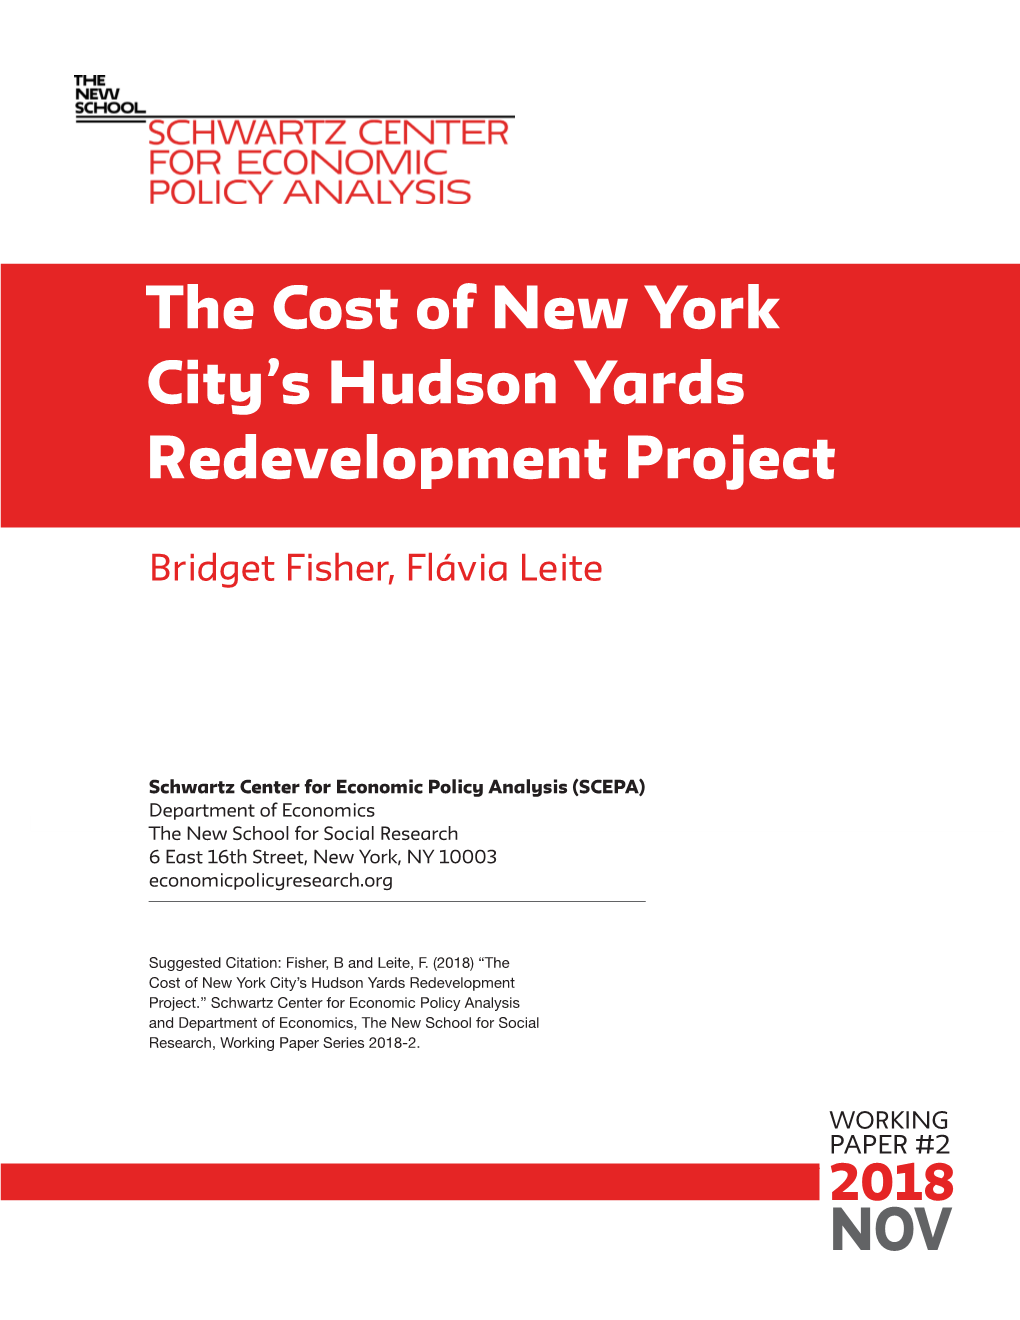 The Cost of New York City's Hudson Yards Redevelopment Project